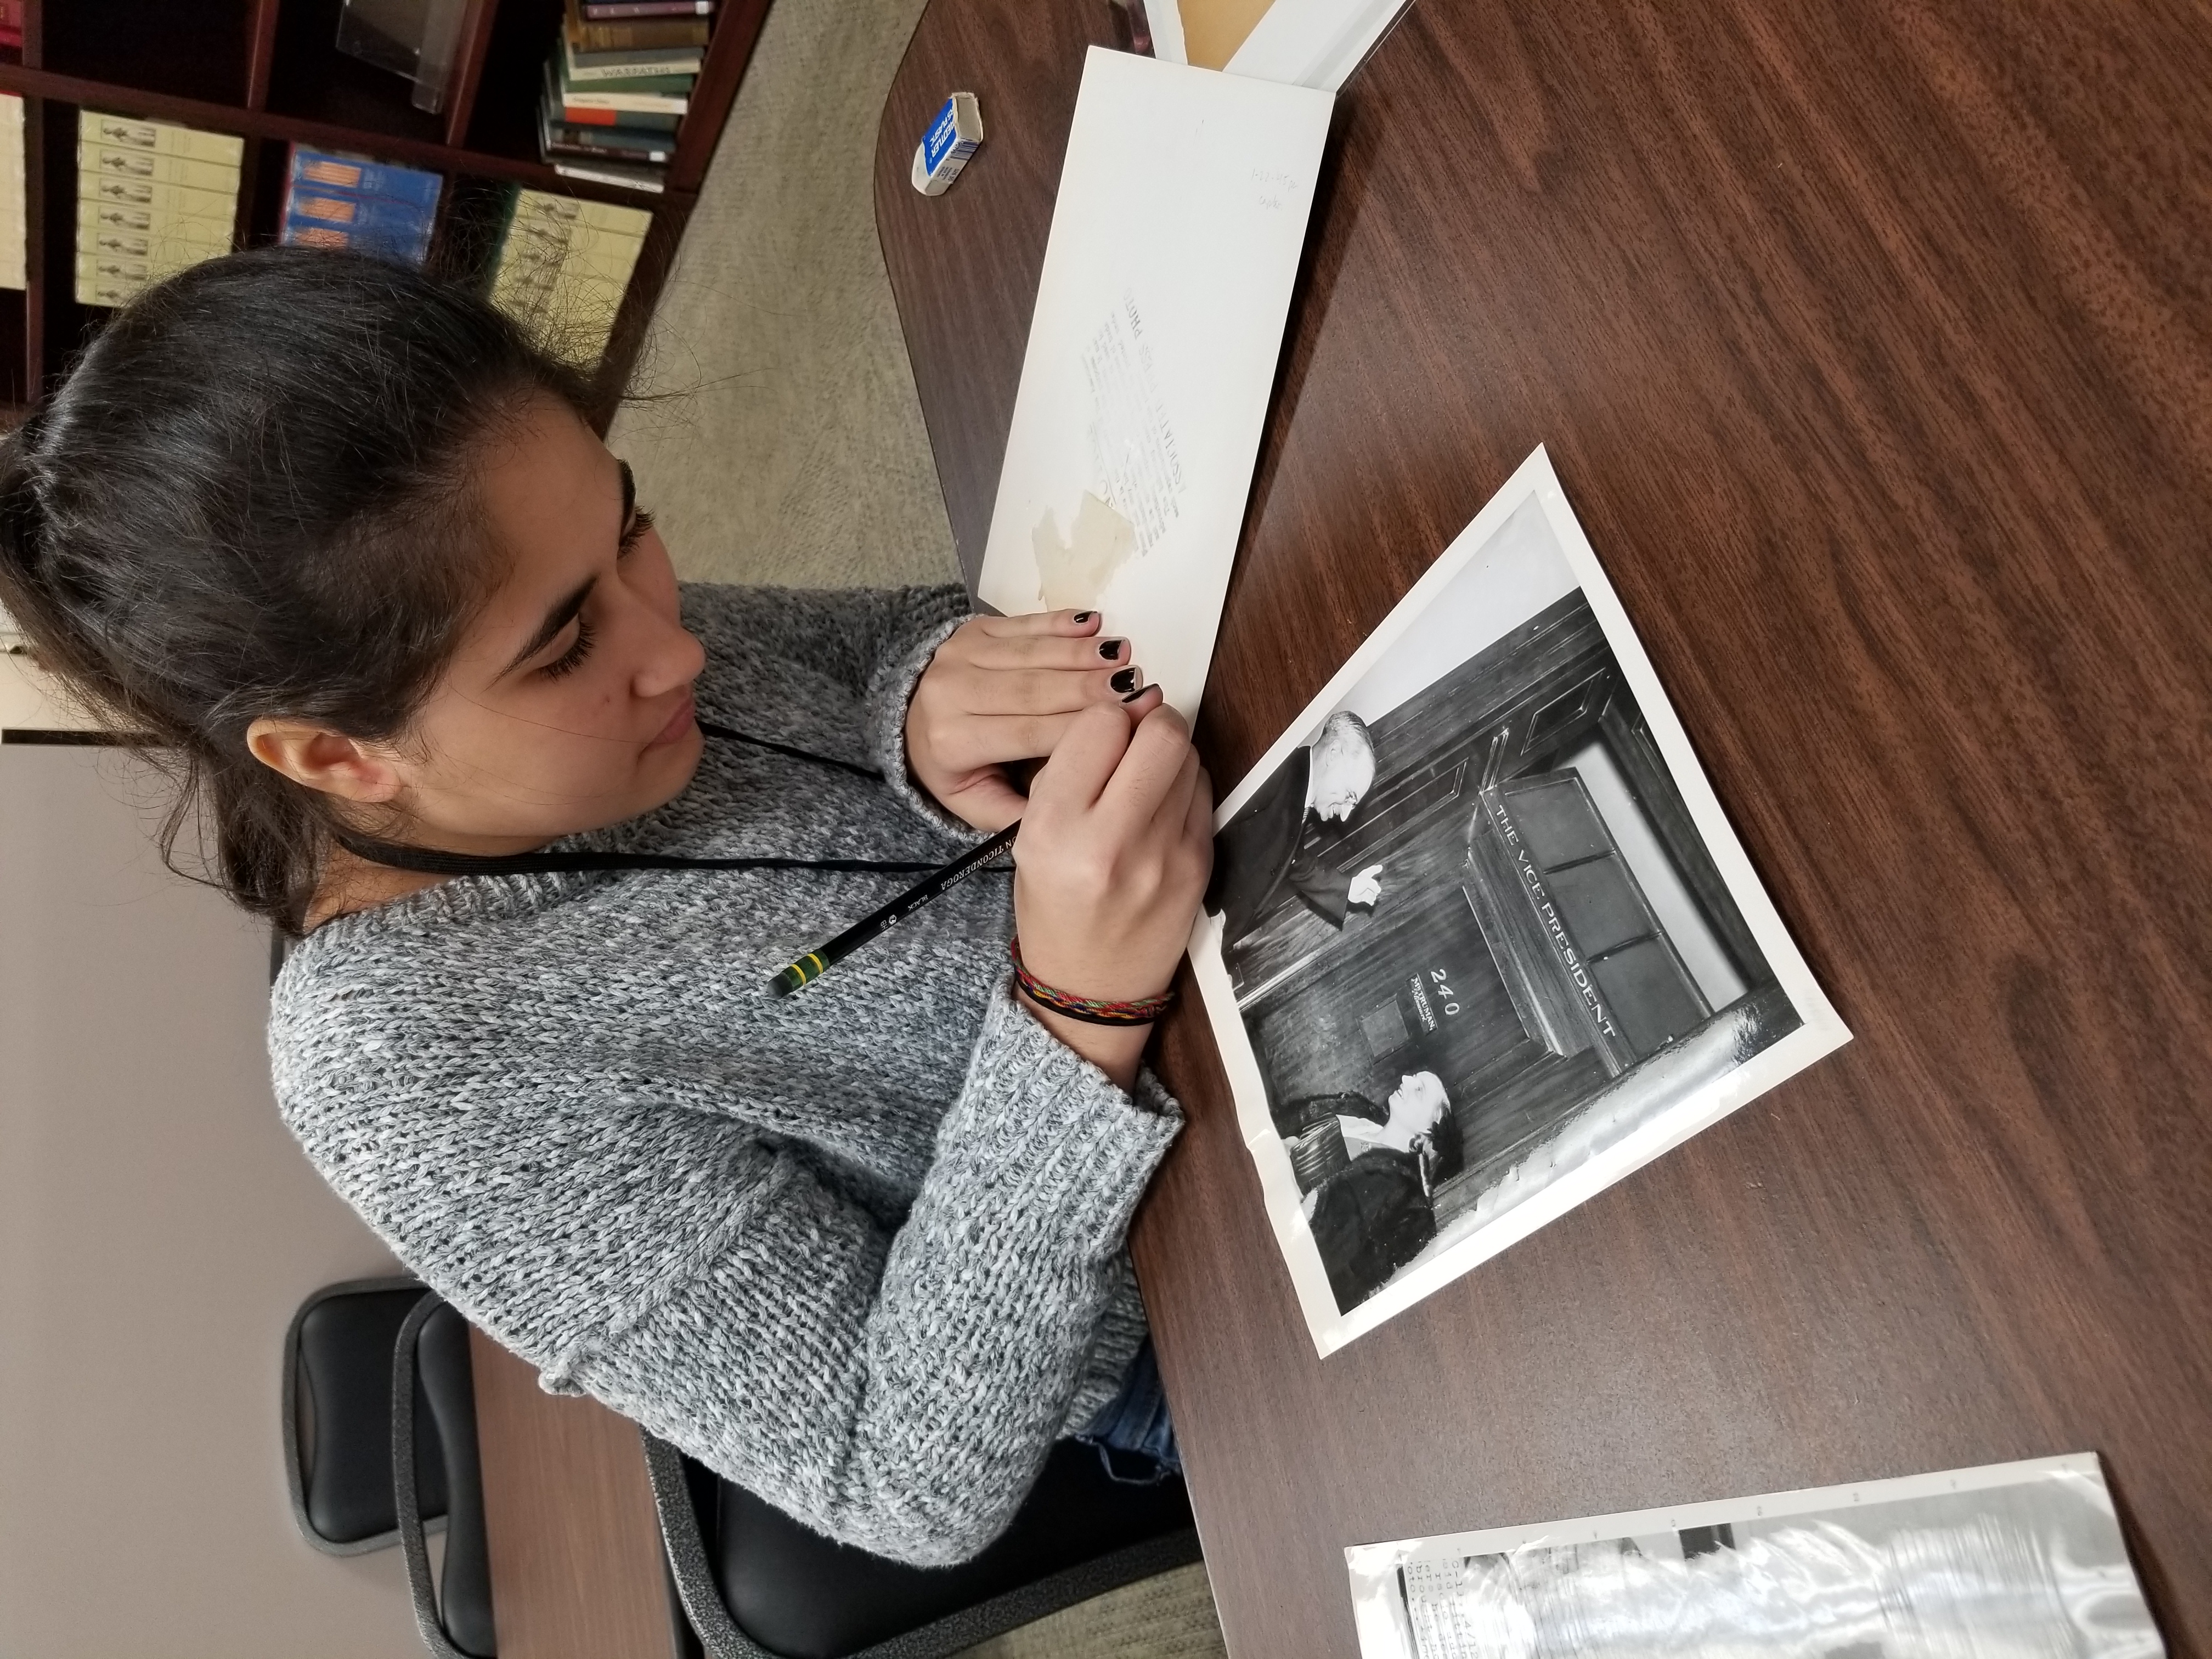 Zoubida Bicane, a member of the Institute’s Student Advisory Council, working on a Gilder Lehrman Collection project